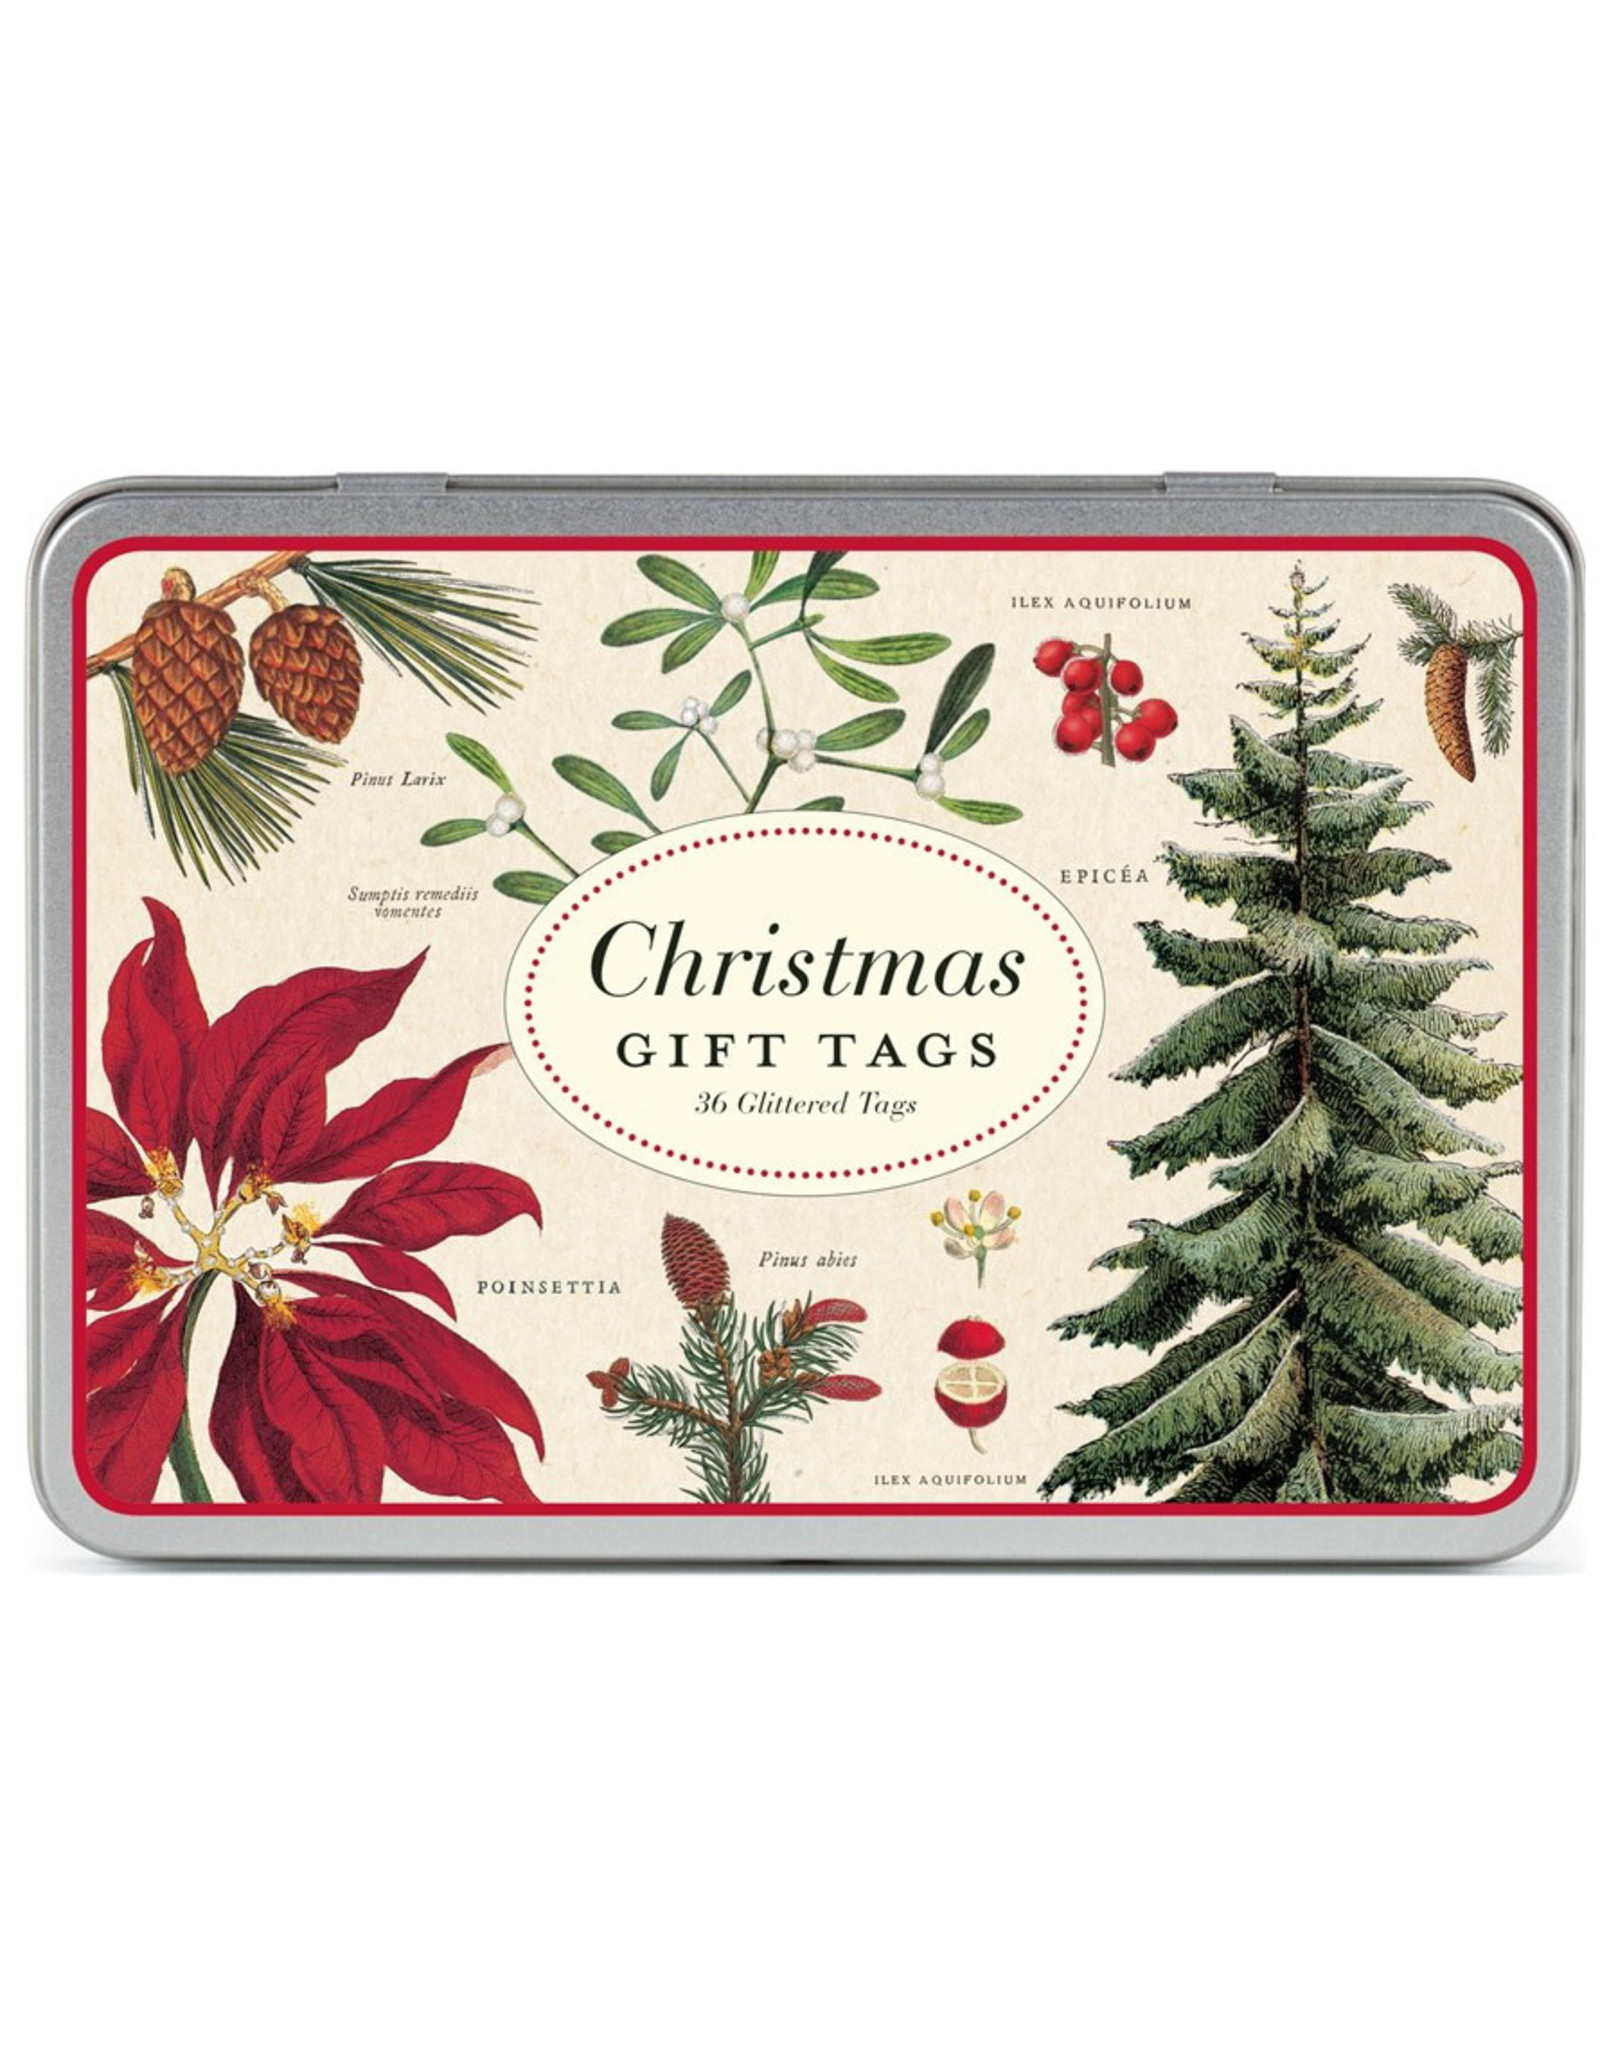 Cavallini Papers & Co. Christmas Botanica Gift Tags